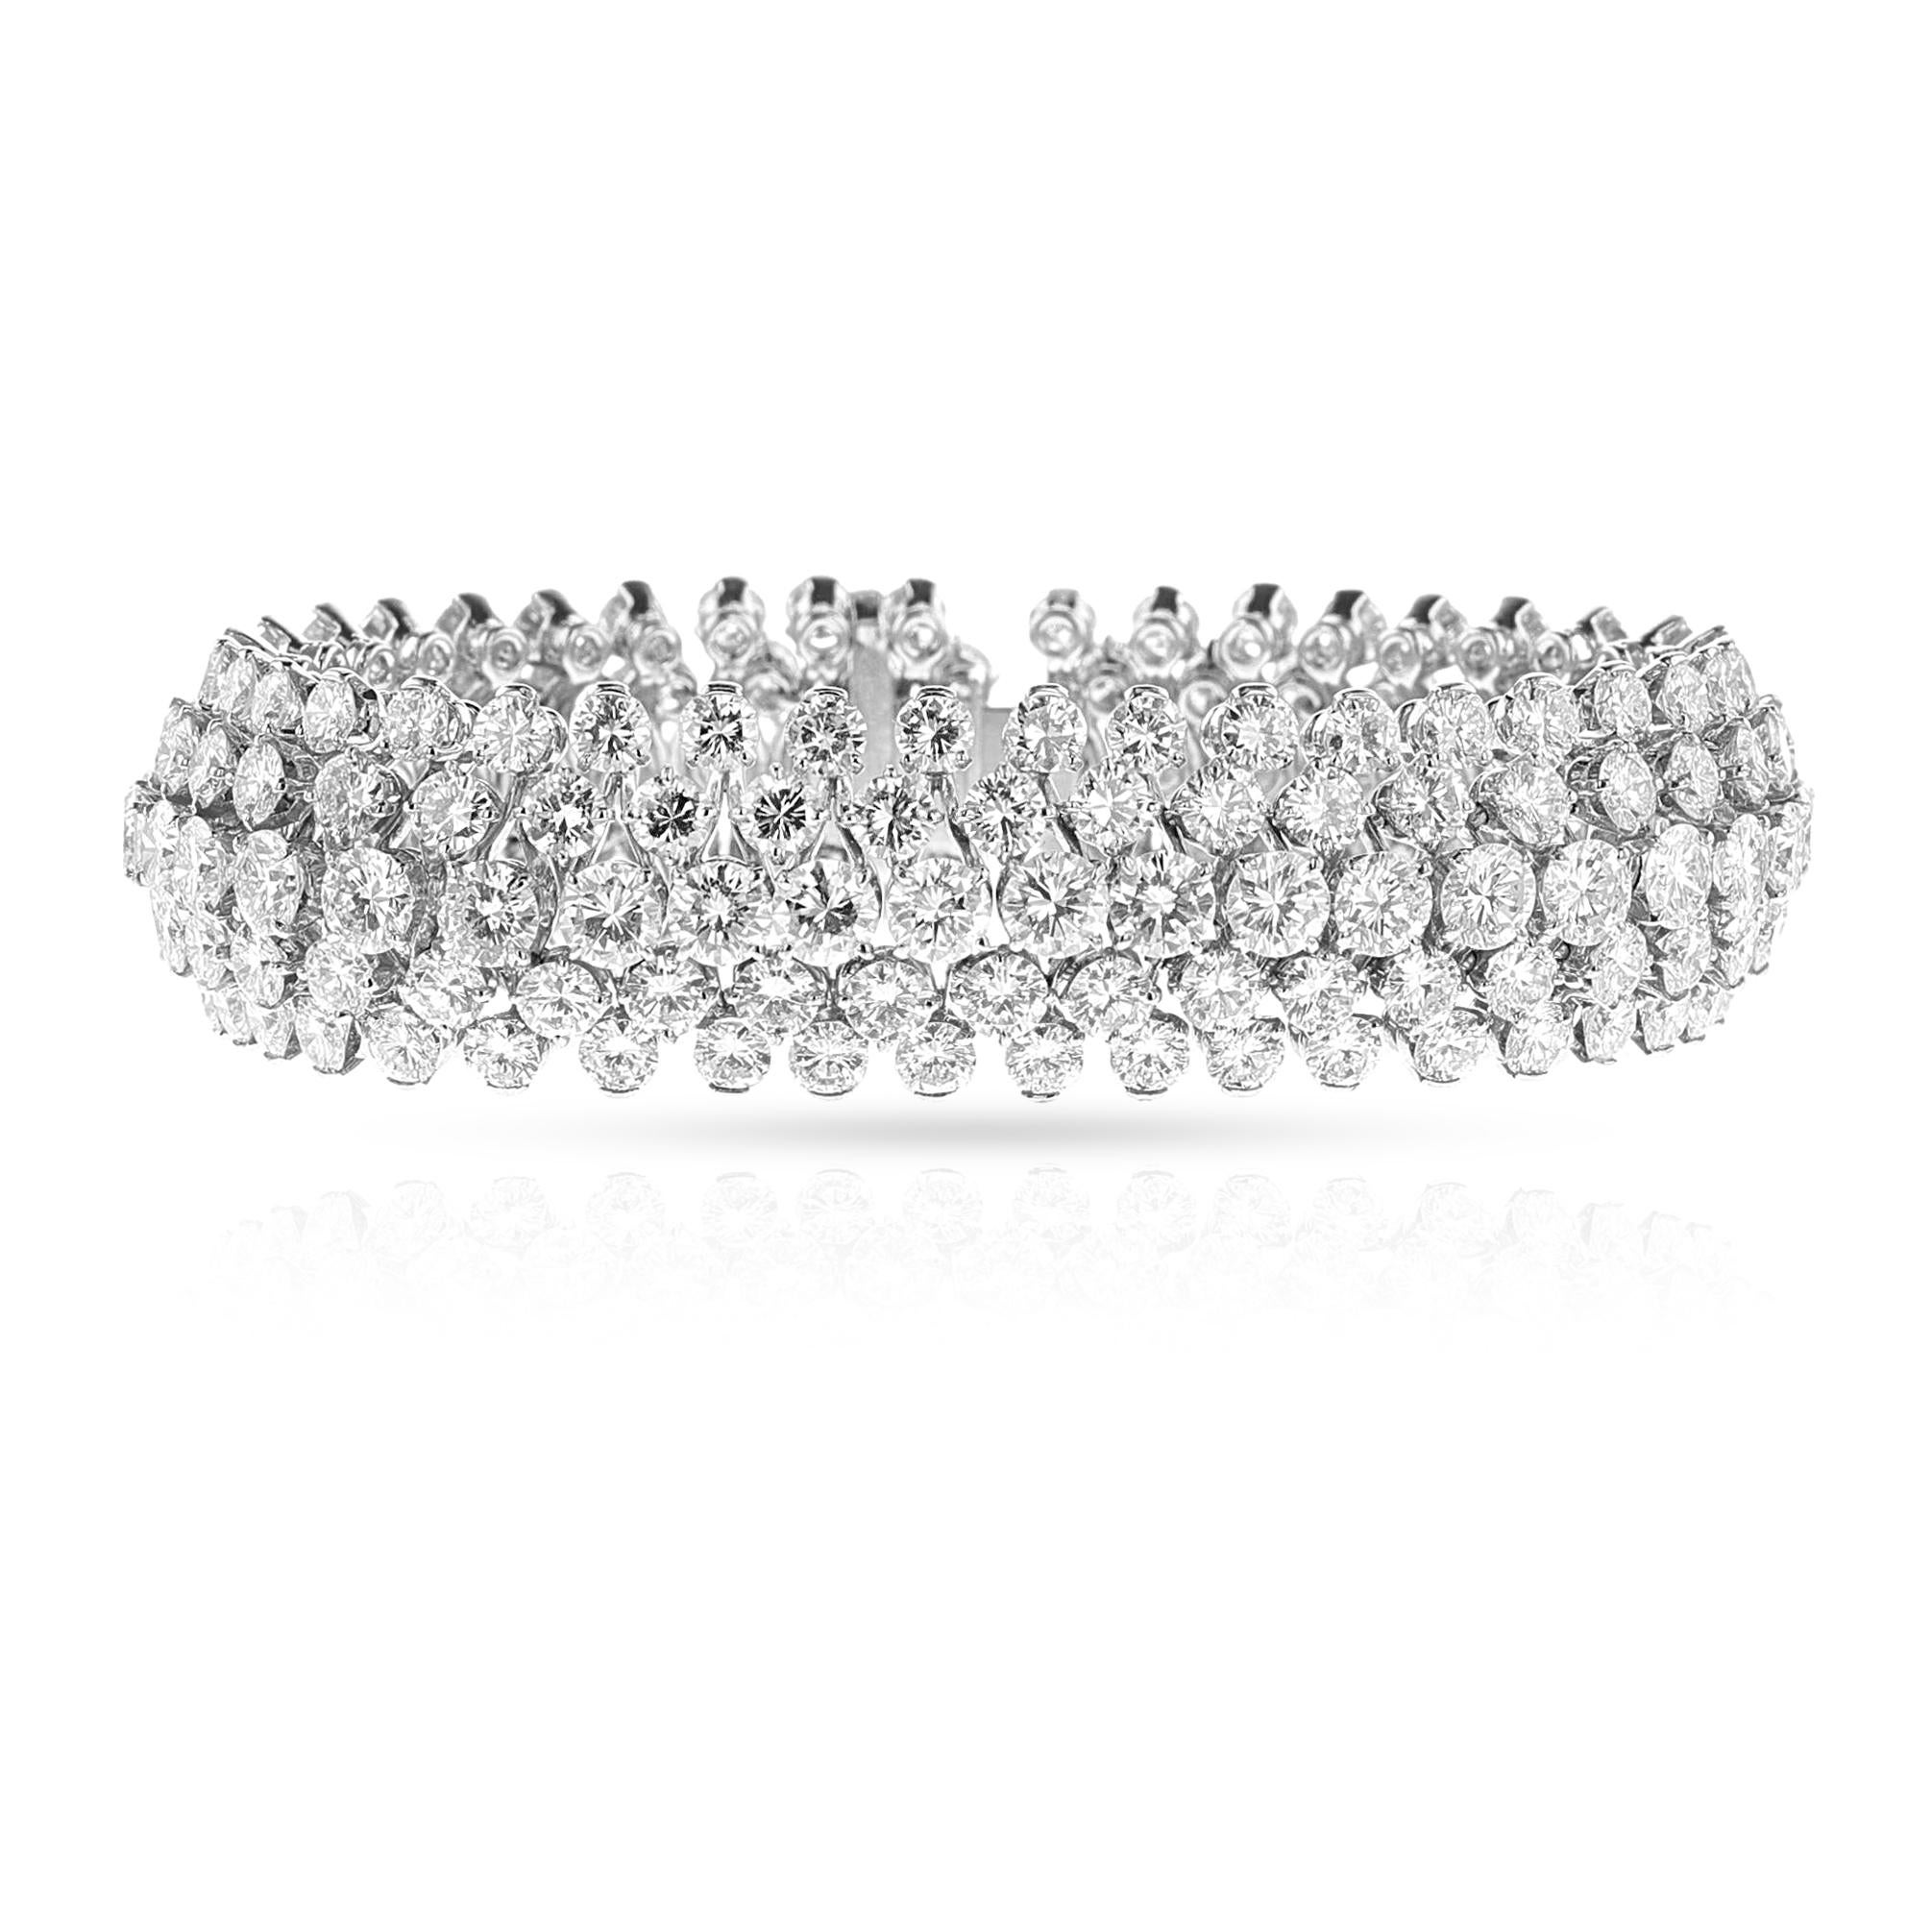 A Van Cleef & Arpels Five Row Diamond Bracelet made in Platinum and 18k white gold. The length of the bracelet is 7 inches long and 0.72 inches wide, weighing 78.90 grams. Signed and numbered with French assay marks and maker's marks.The diamonds